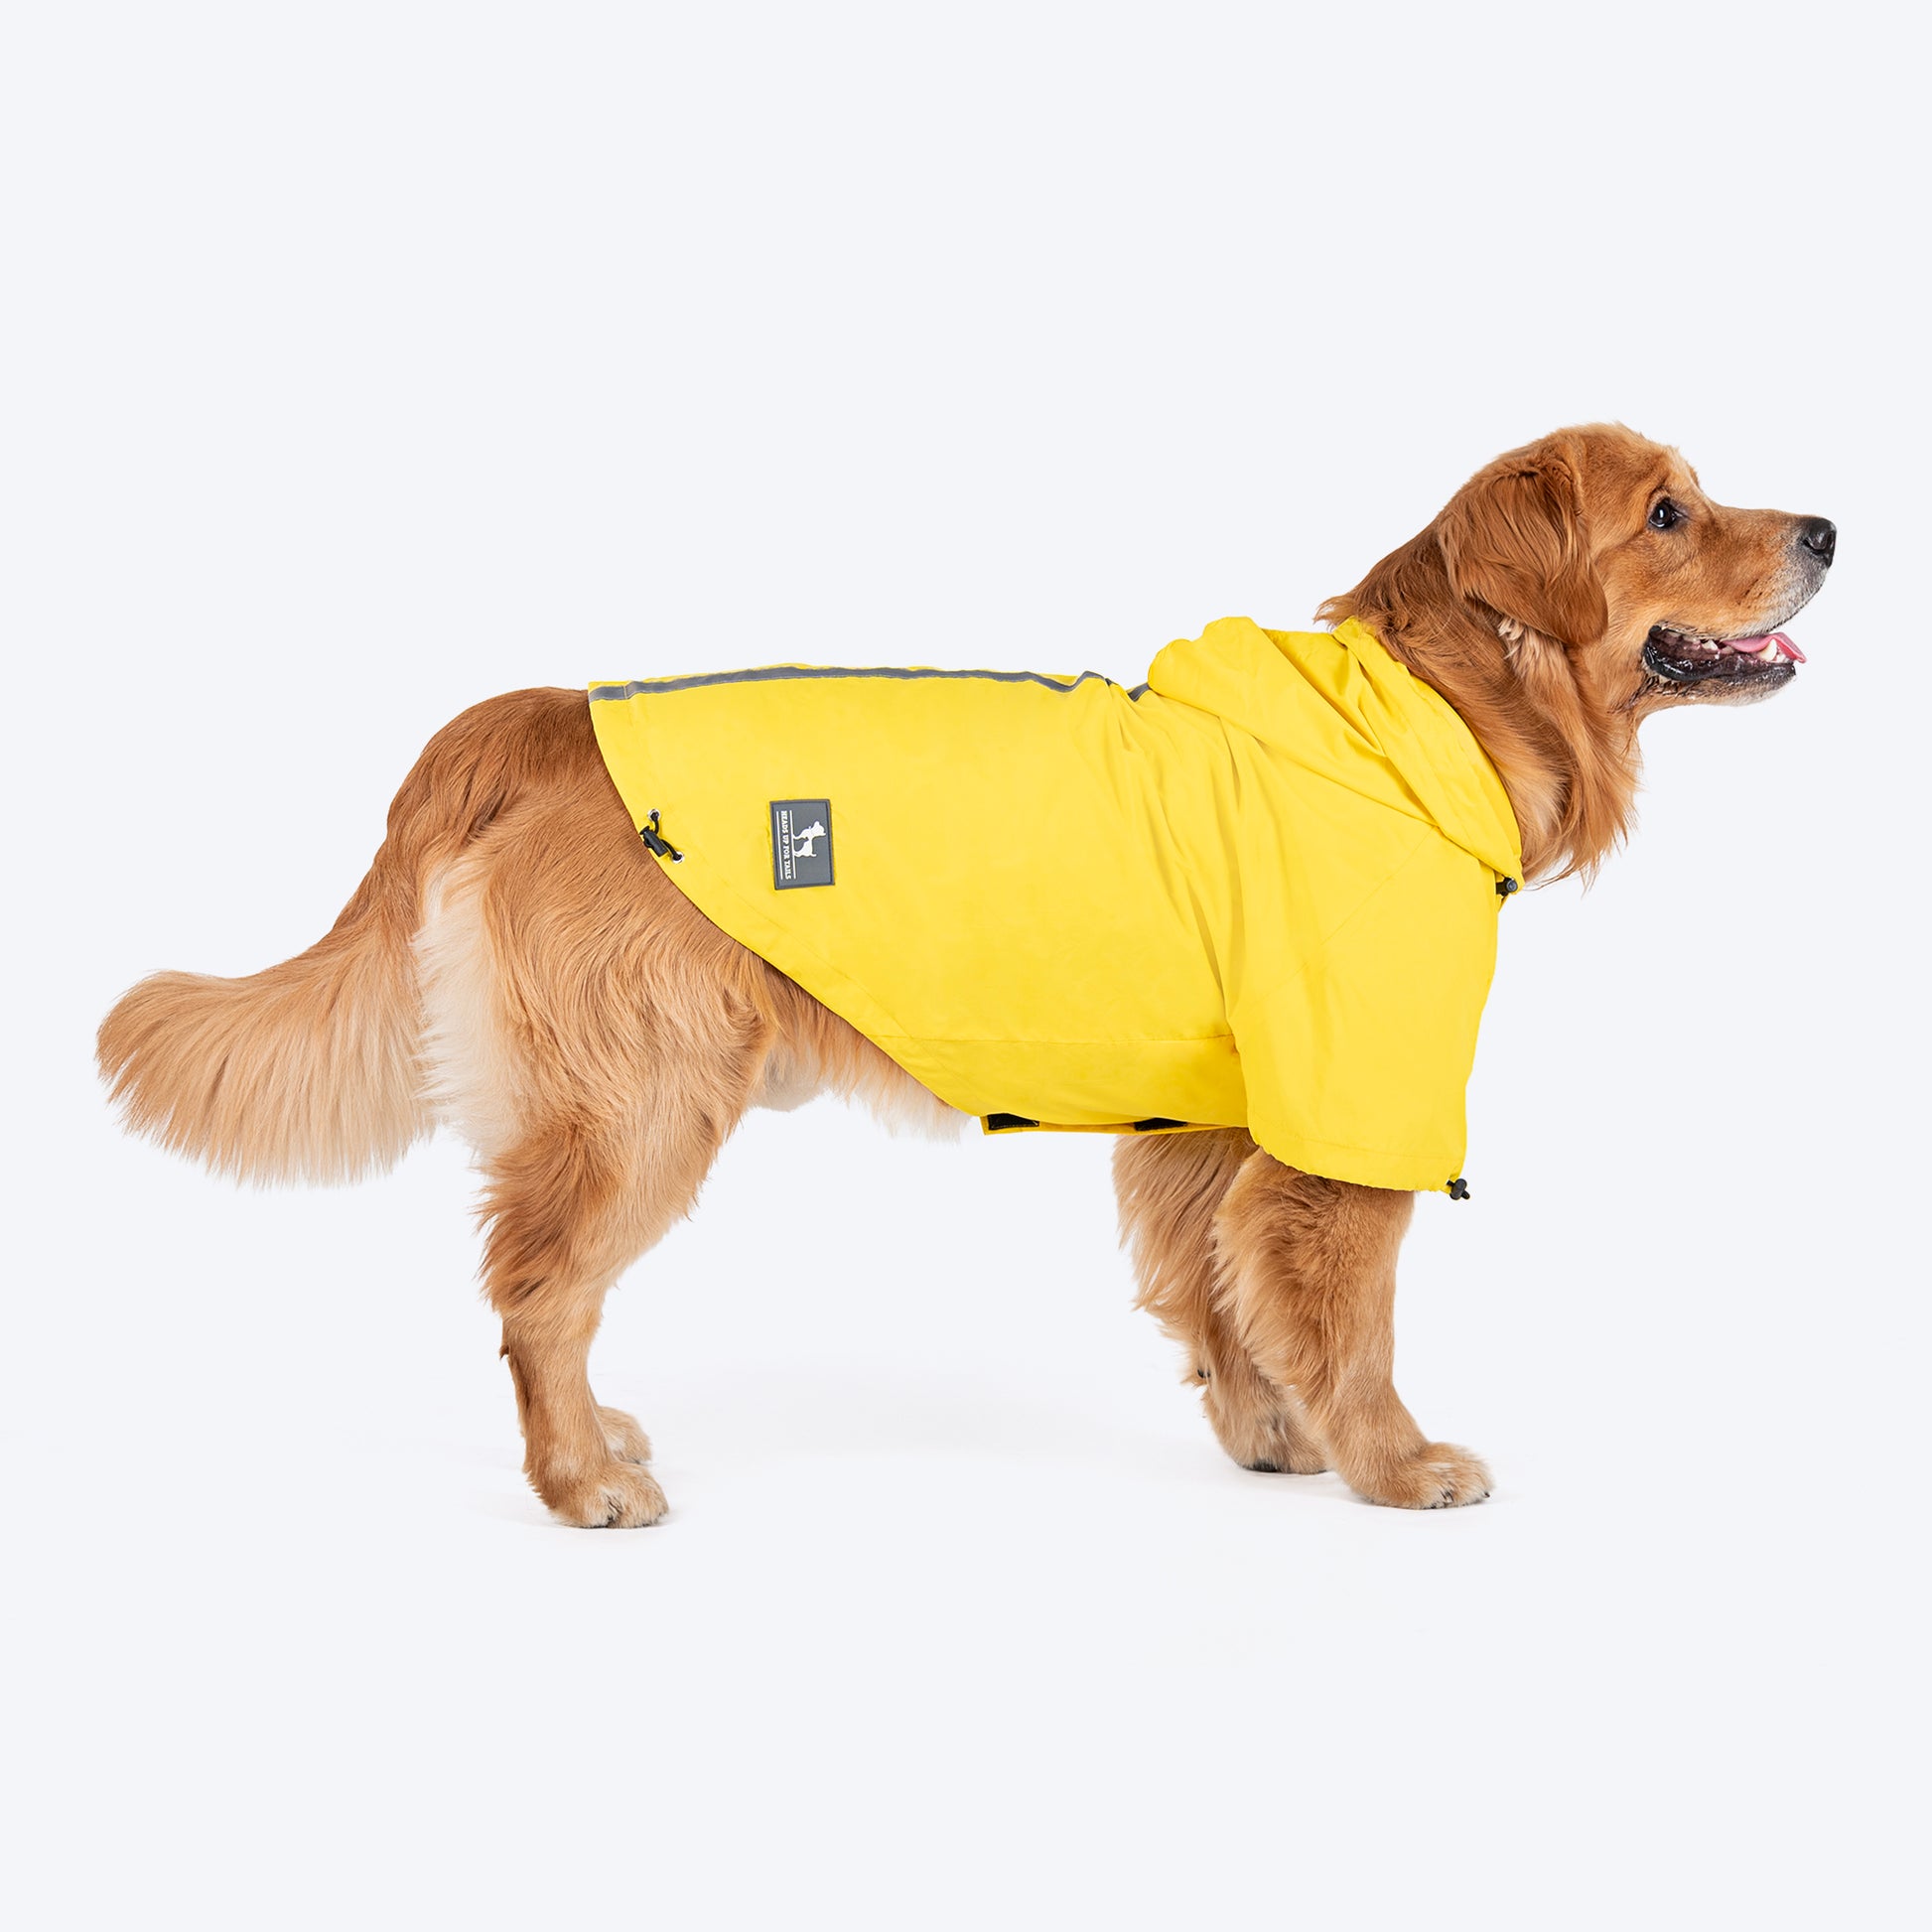 HUFT Magical Mist Raincoats For Dog & Cat - Sunshine Yellow - Heads Up For Tails